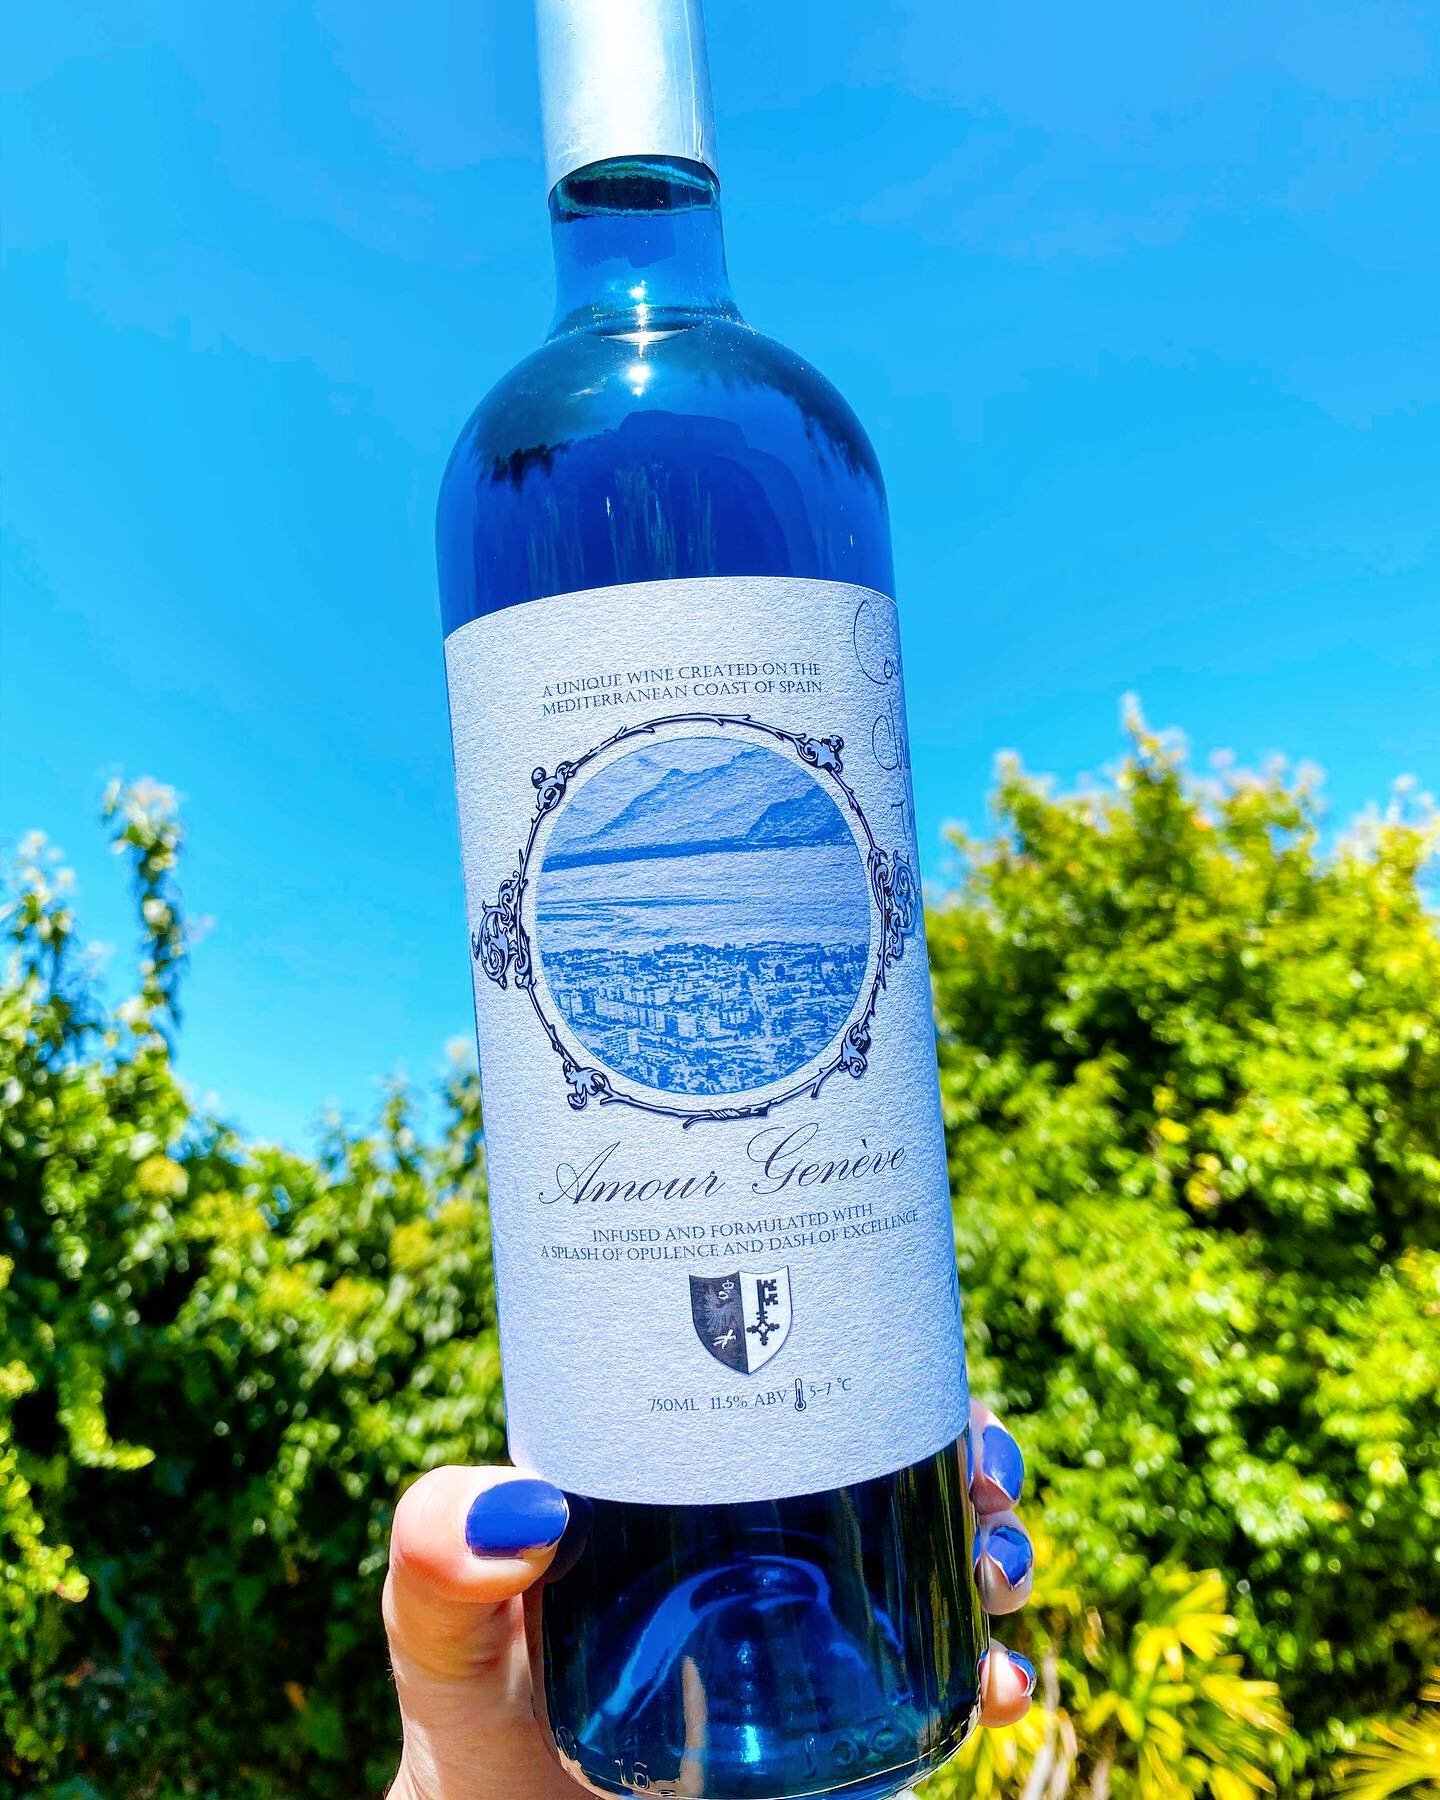 I finally tried the world&rsquo;s first naturally blue wine from @amourgeneve and it was signed with a note by @mr.coviello himself!! 💙 For starters, this wine is so unique and I love that it&rsquo;s blue. So crisp, refreshing, and you can absolutel